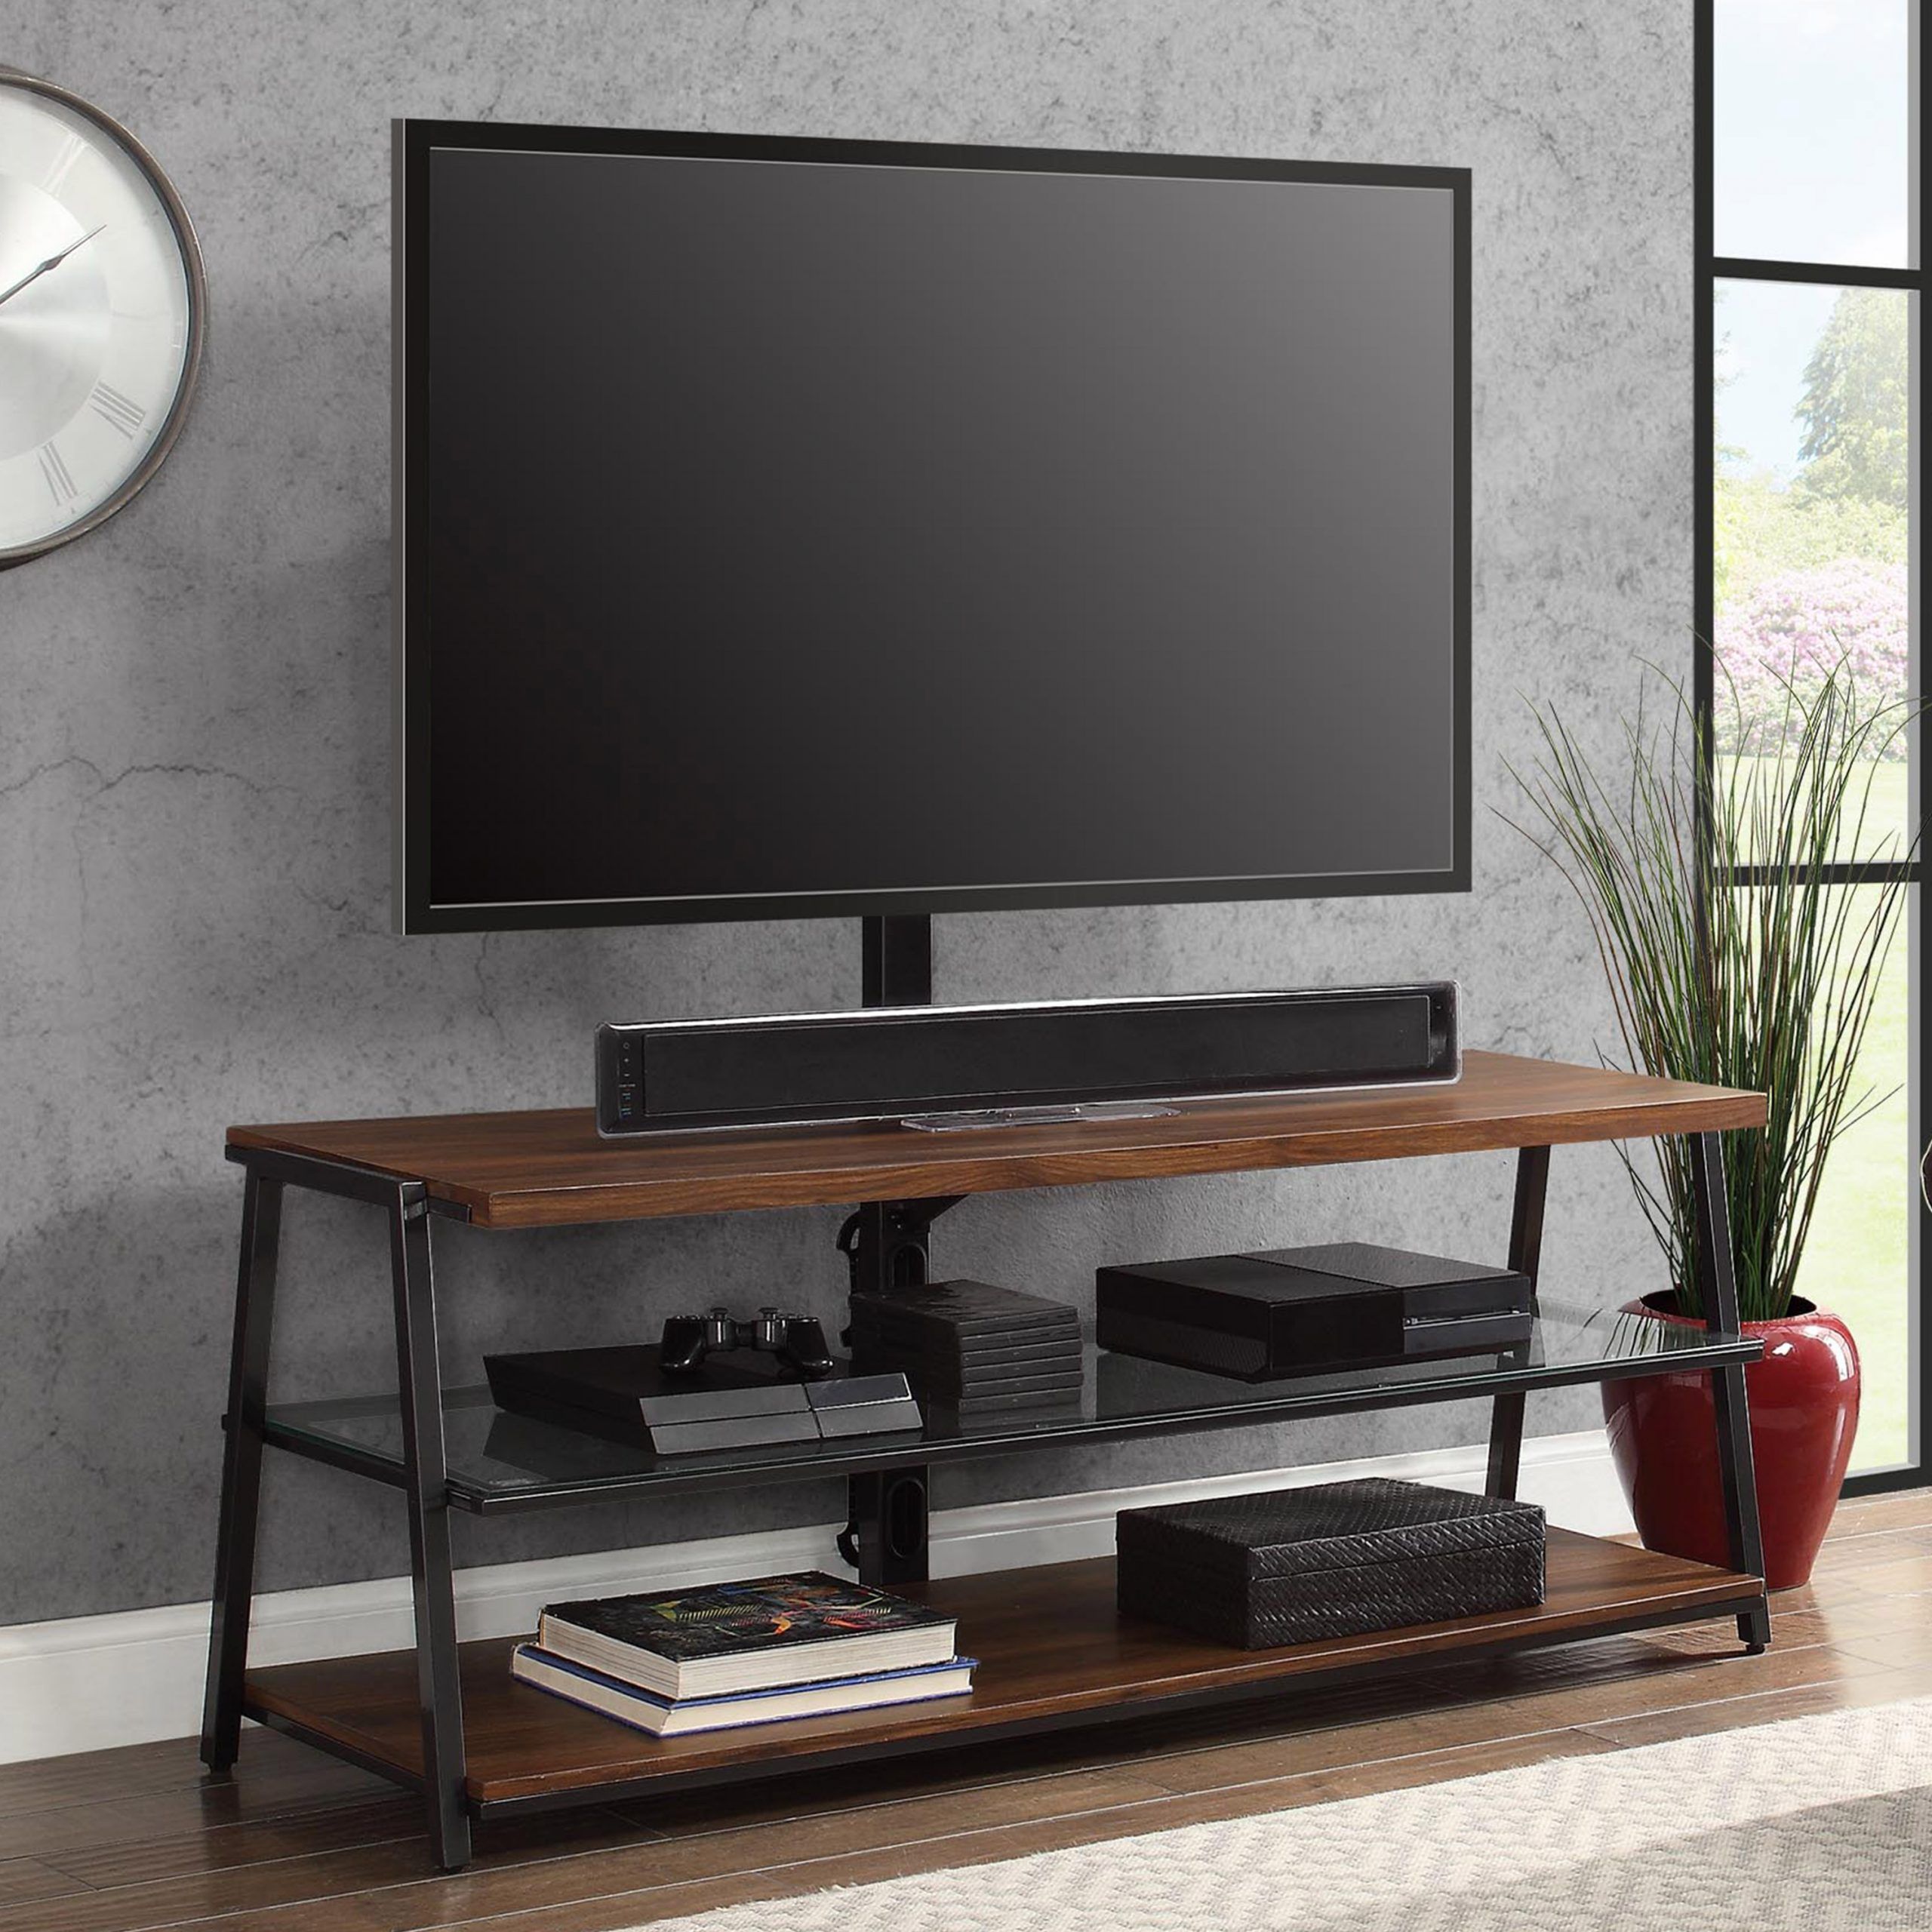 Mainstays Arris 3 In 1 Tv Stand For Televisions Up To 70 Pertaining To Most Up To Date Mainstays Arris 3 In 1 Tv Stands In Canyon Walnut Finish (View 3 of 10)